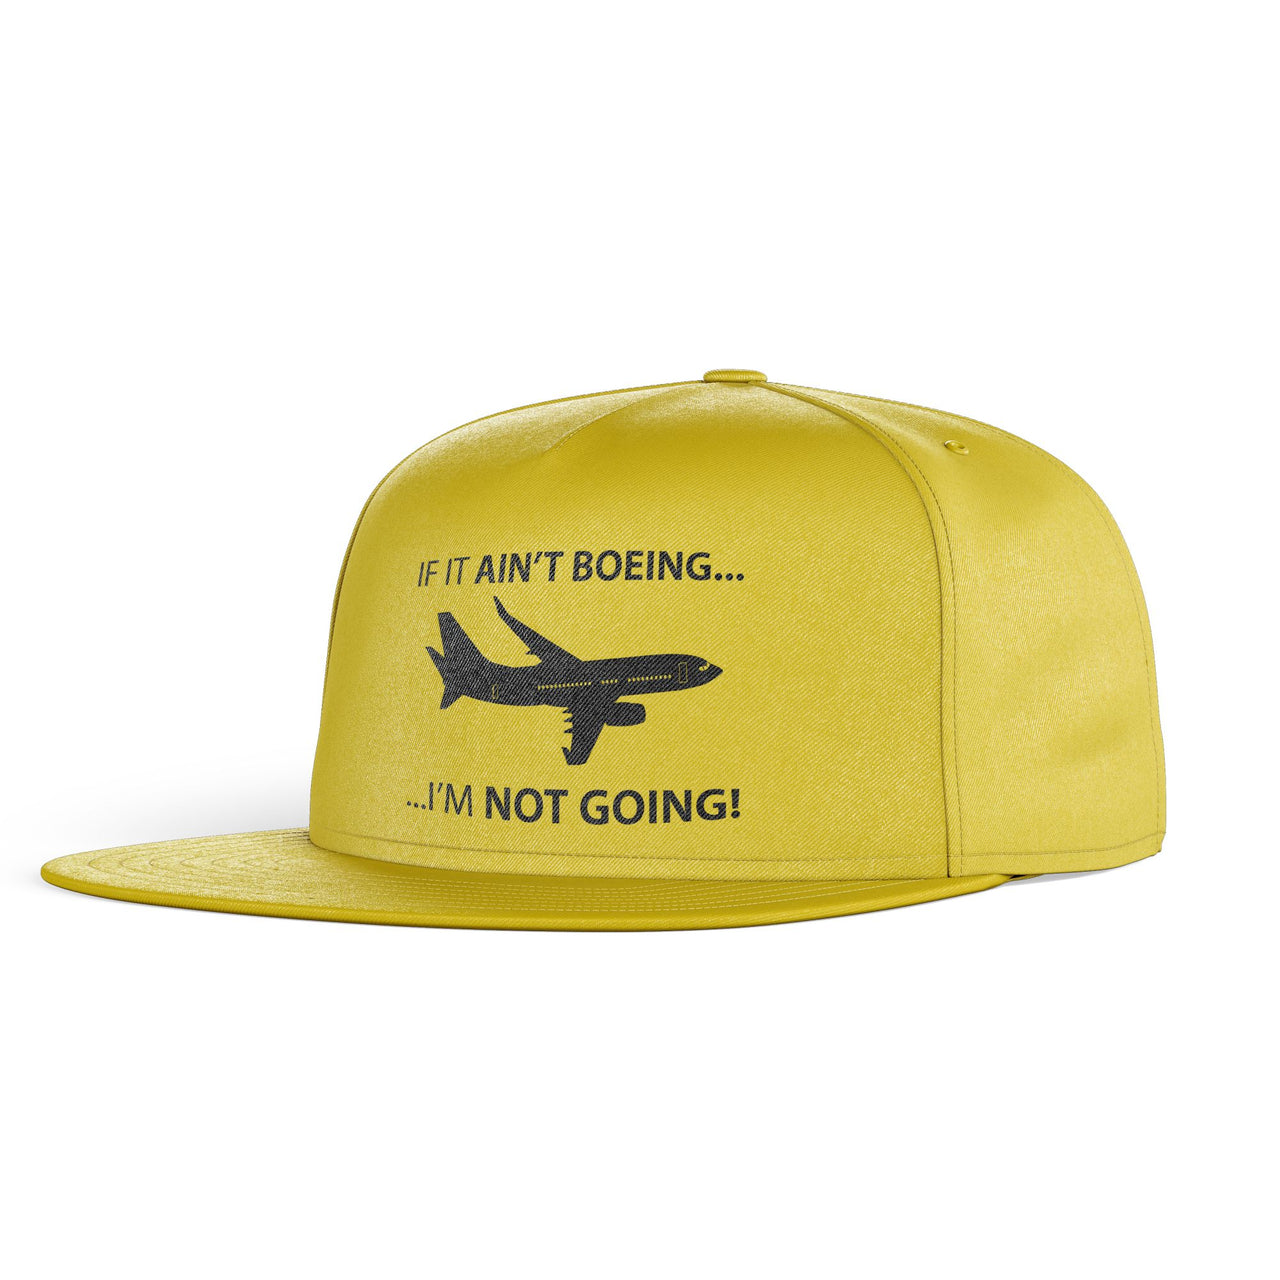 If It Ain't Boeing I'm Not Going! Designed Snapback Caps & Hats